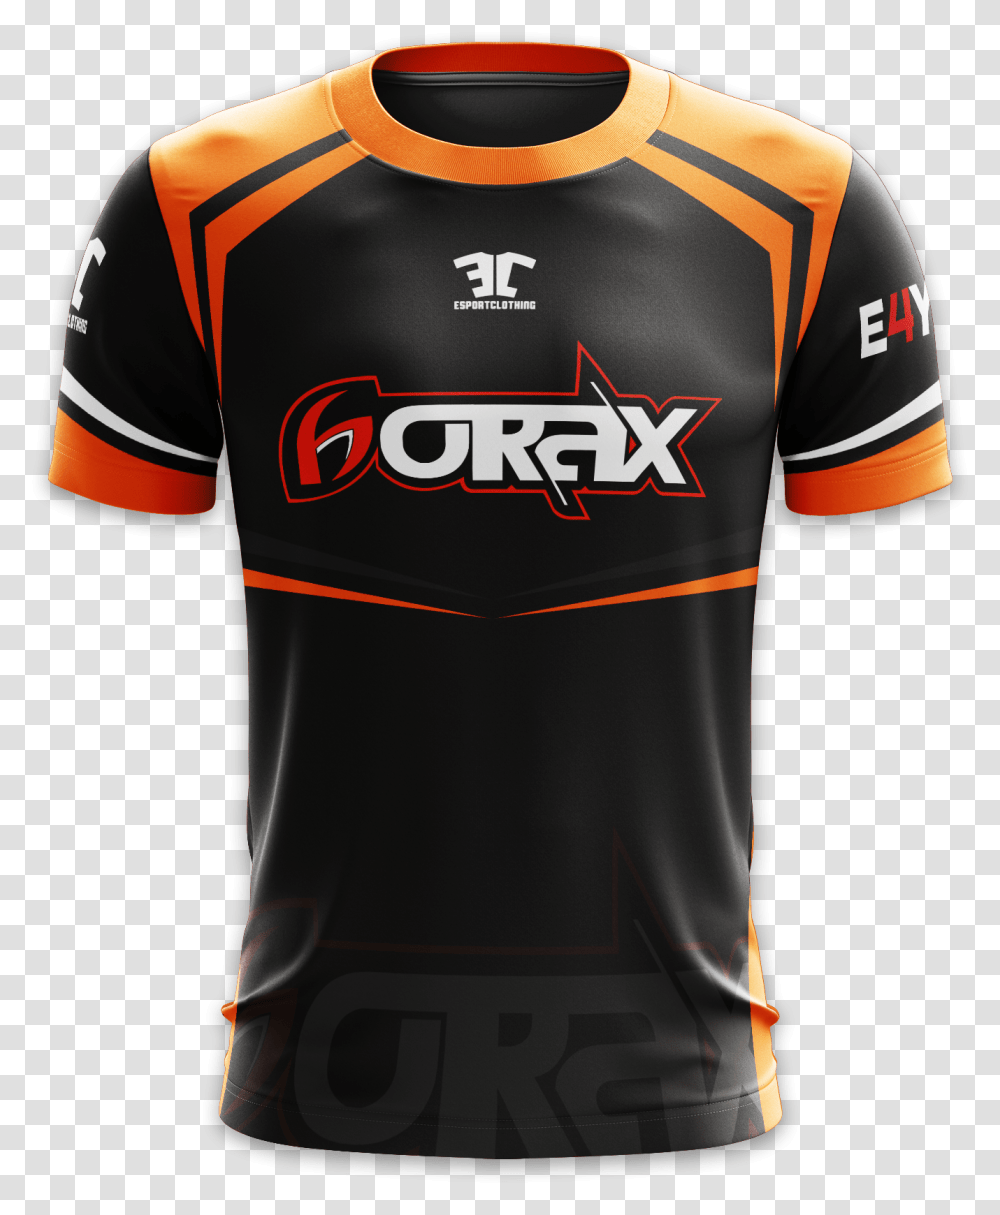 Esportclothing - If You Want To Game In Style Orange And Black Esports Jersey, Apparel, Shirt Transparent Png